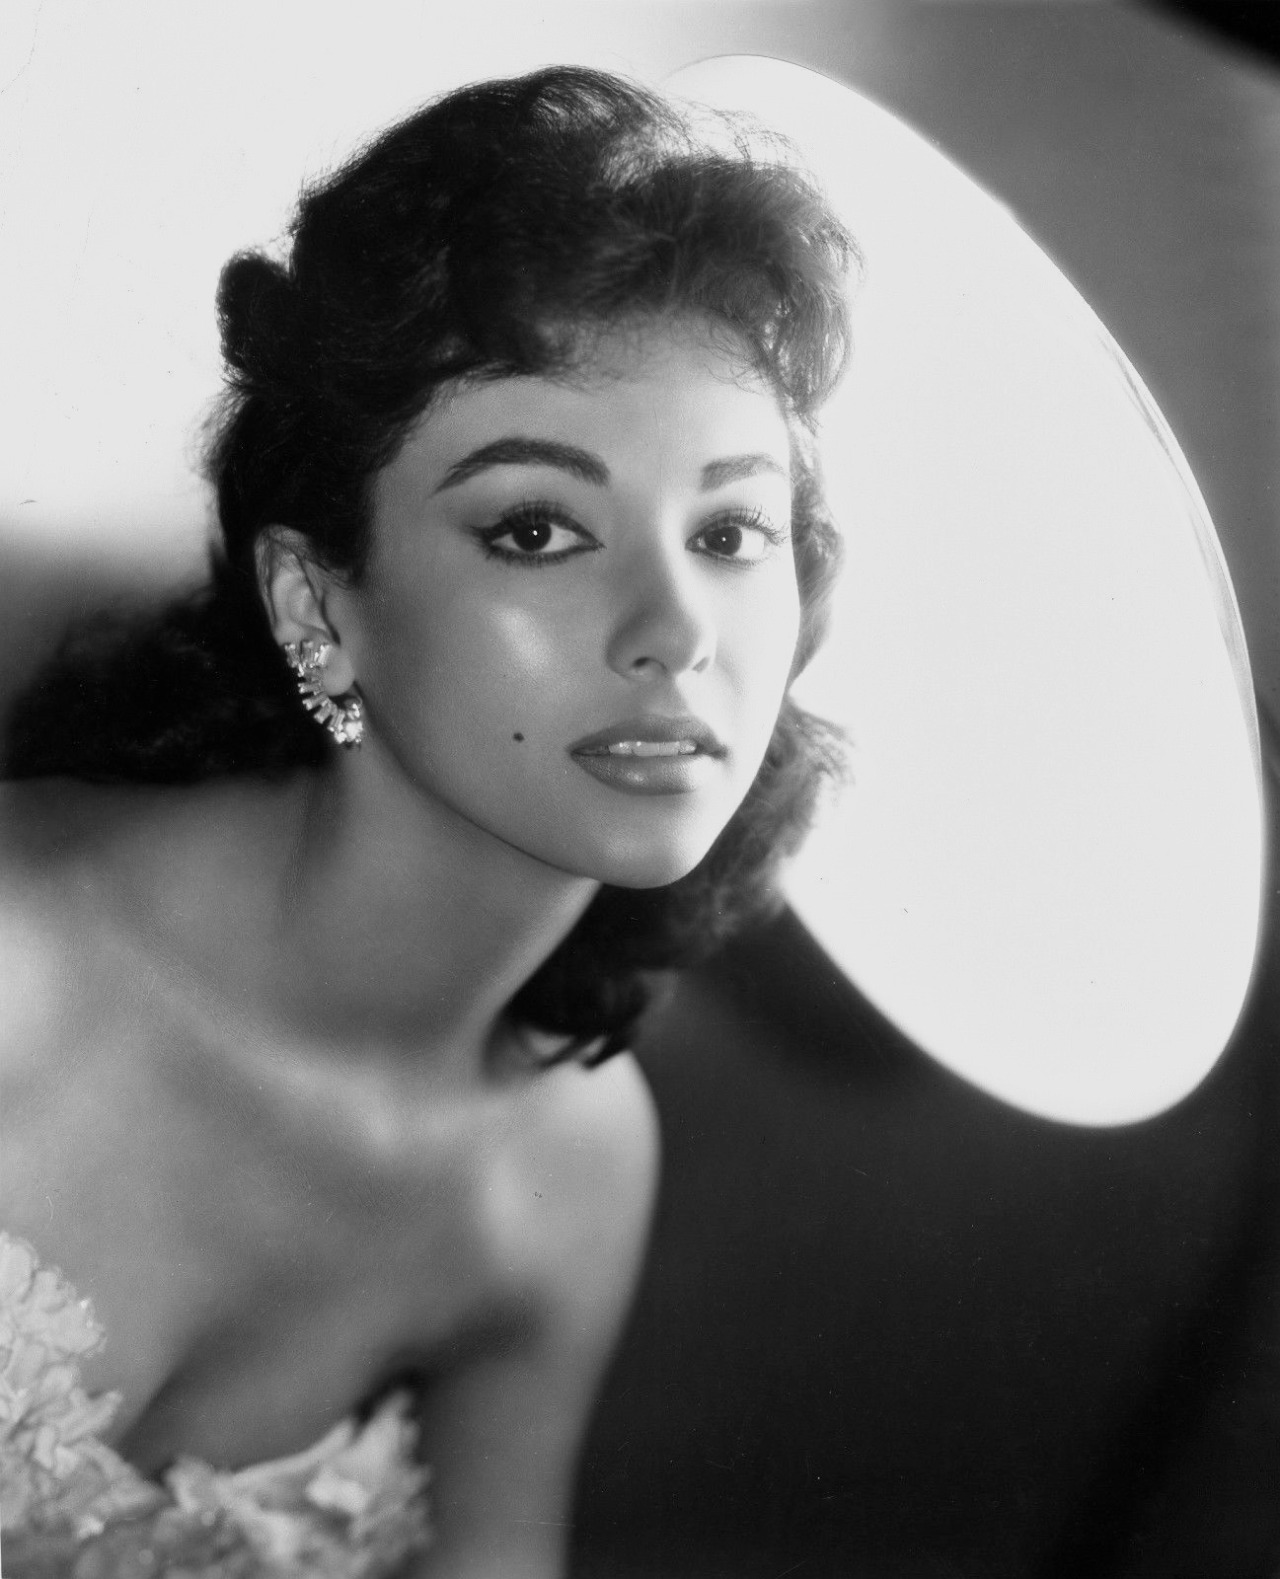 summers-in-hollywood:
âRita Moreno
â